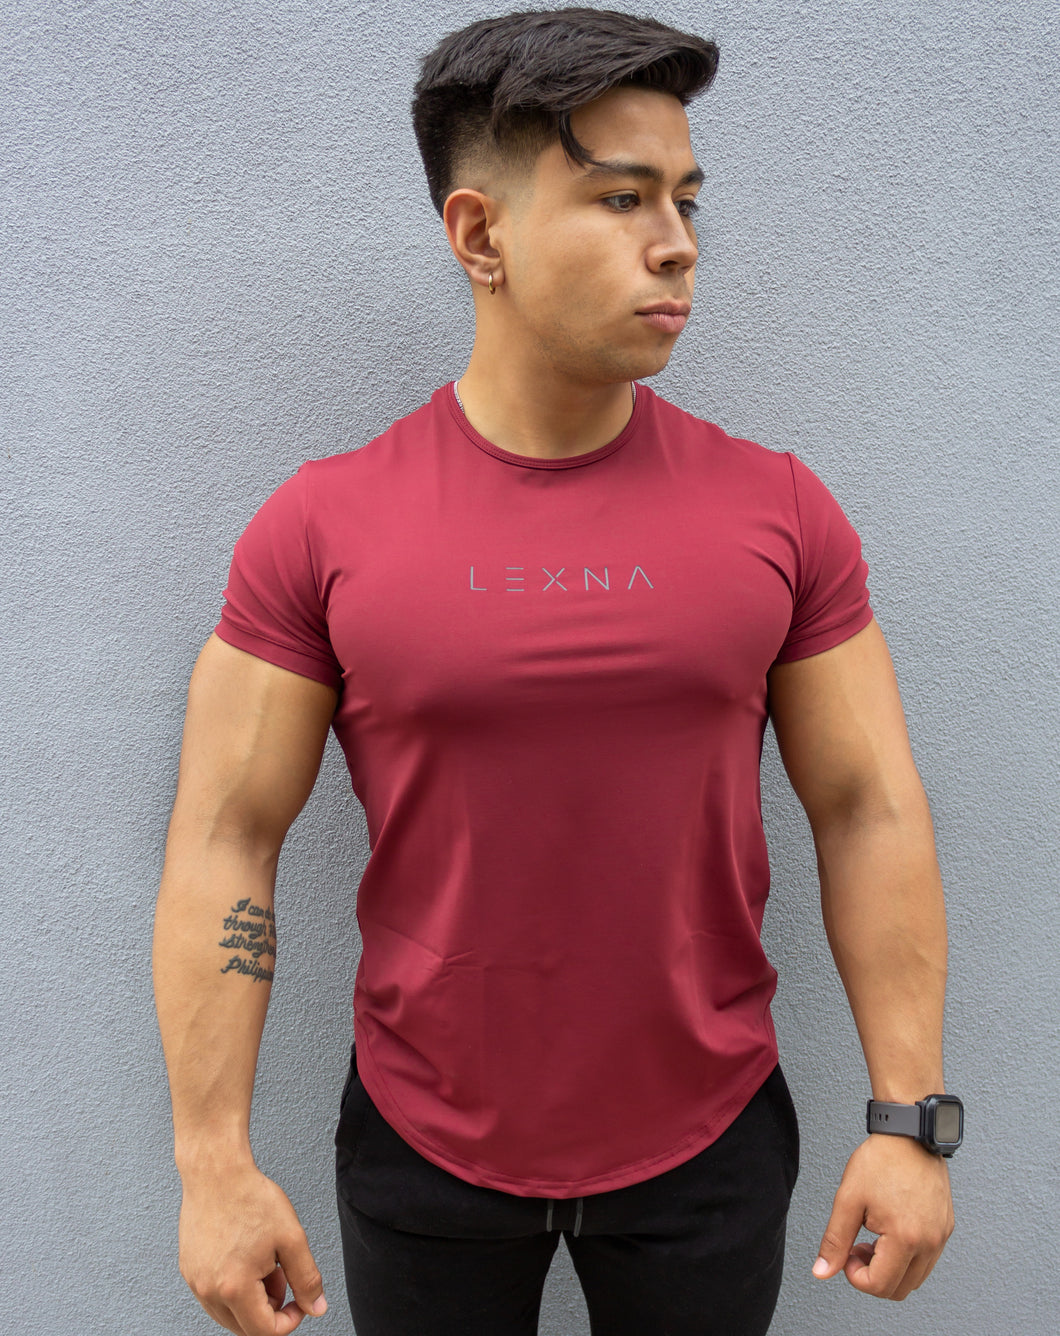 Men's Fitted t-shirt Maroon